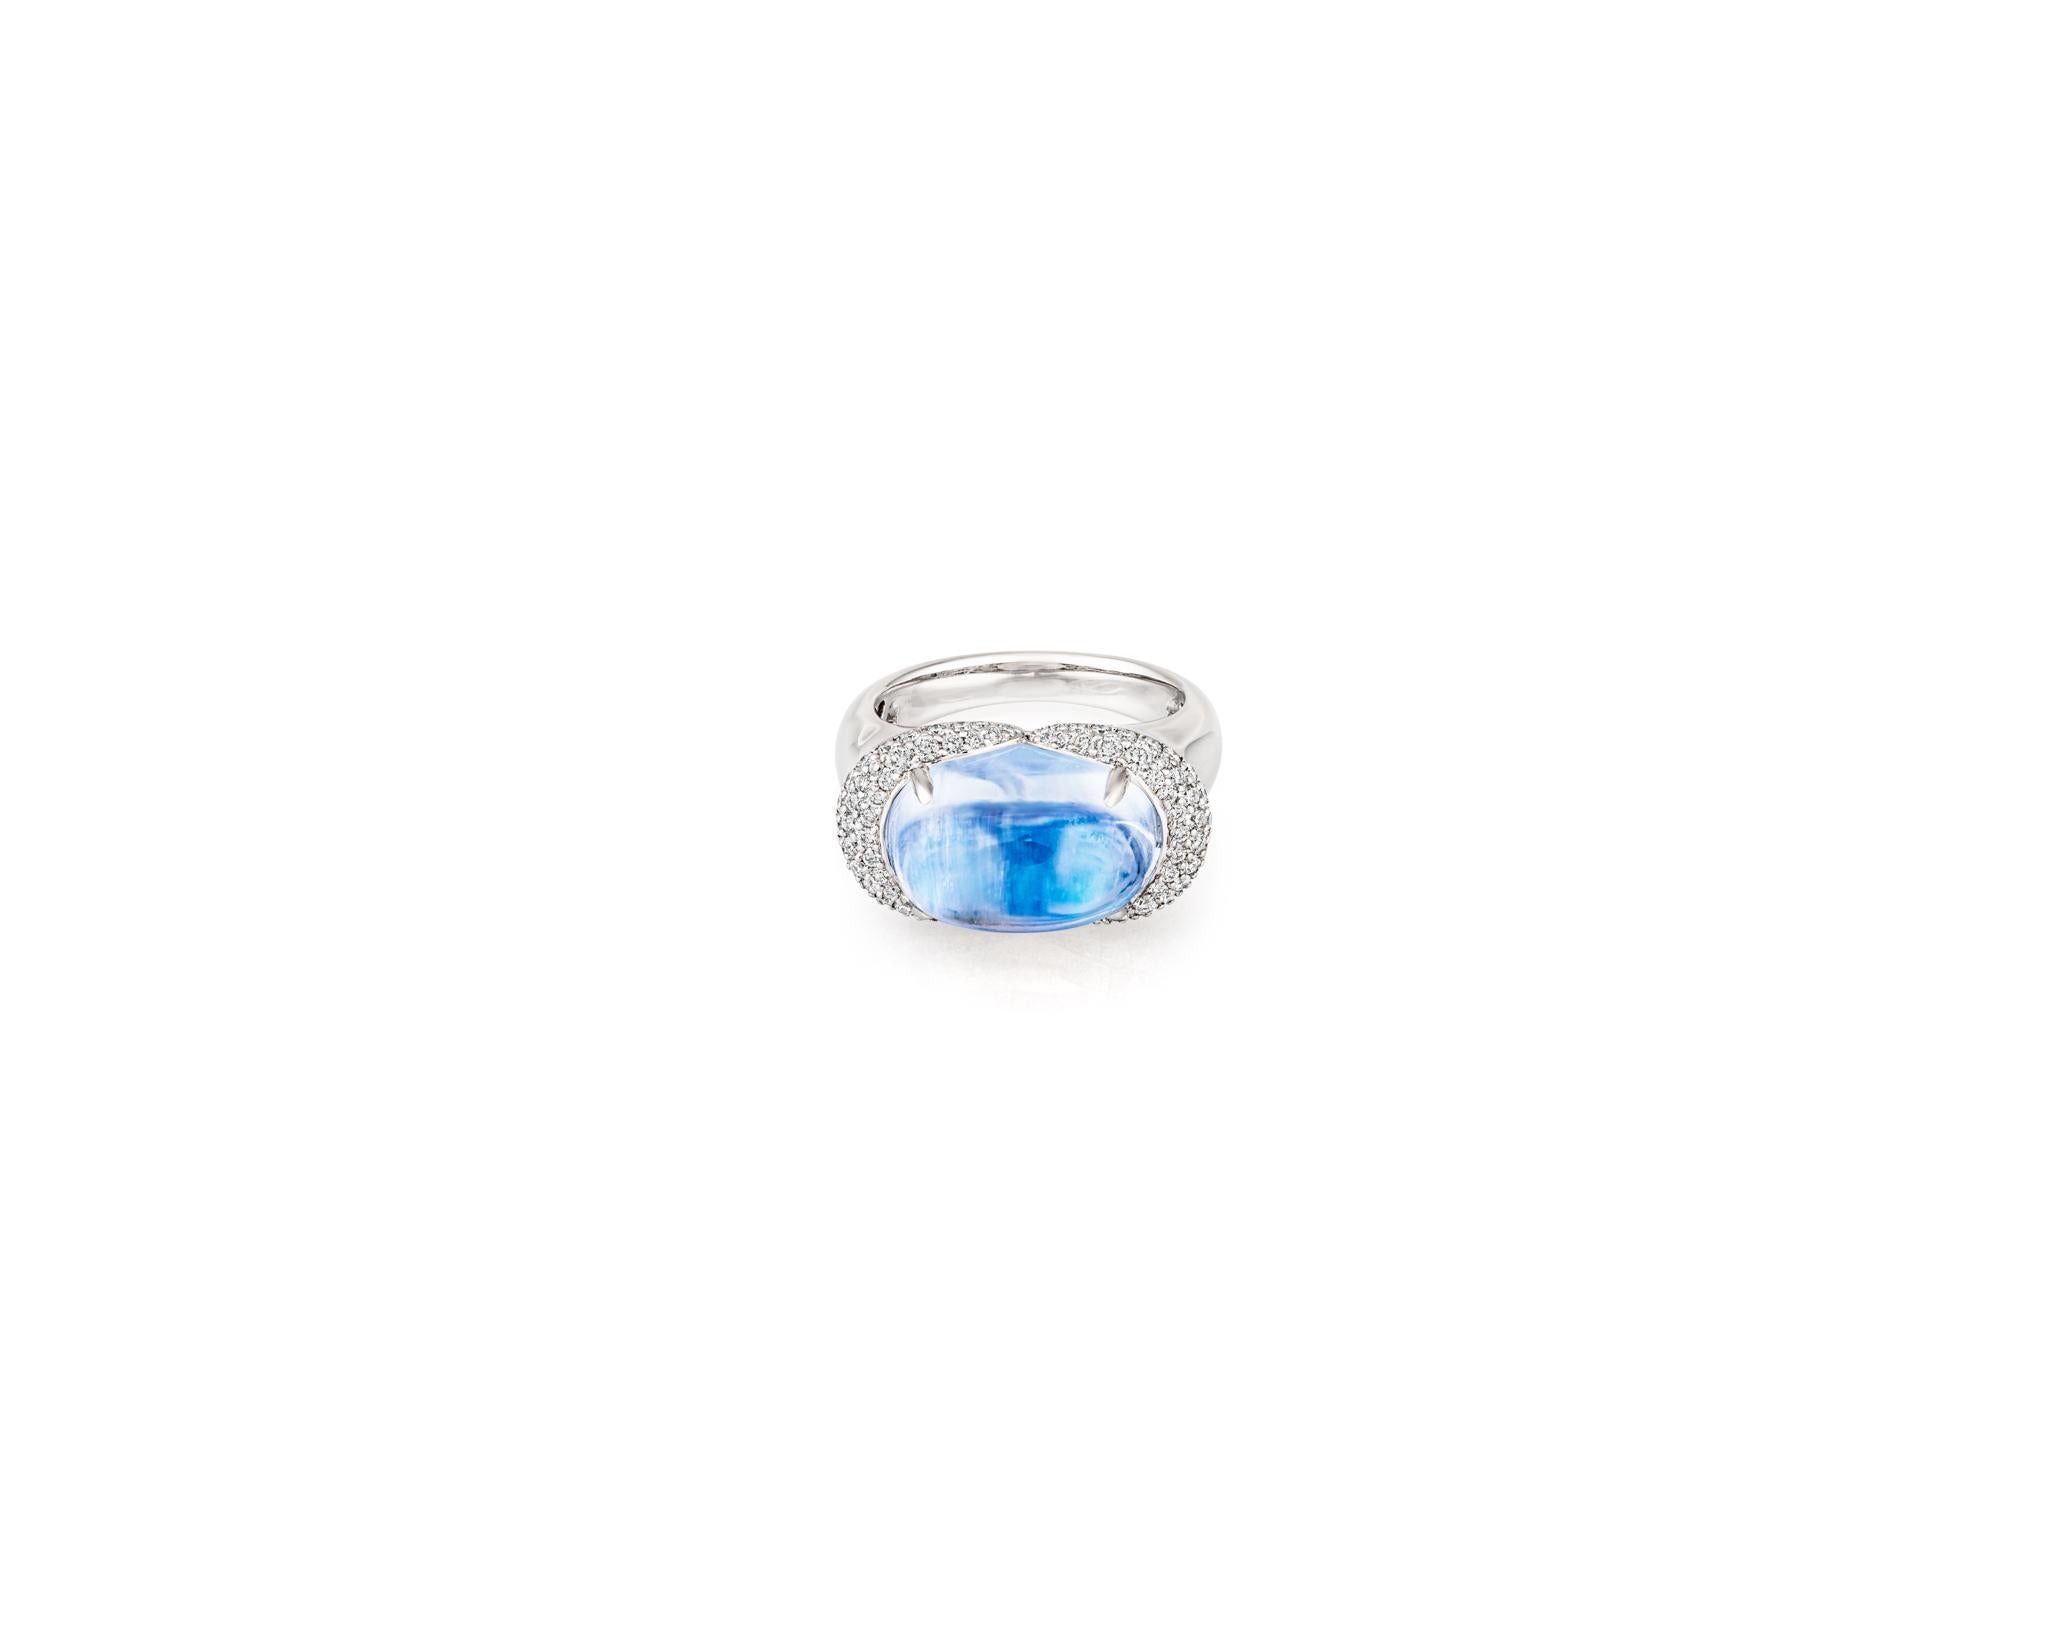 Beautiful 10.70ct Moonstone surrounded by .65ct Diamonds on 18kt White Gold. With the highest quality materials and vintage-inspired design, this ring will make you feel like you're a royal in the Renaissance Age. Only one available. 